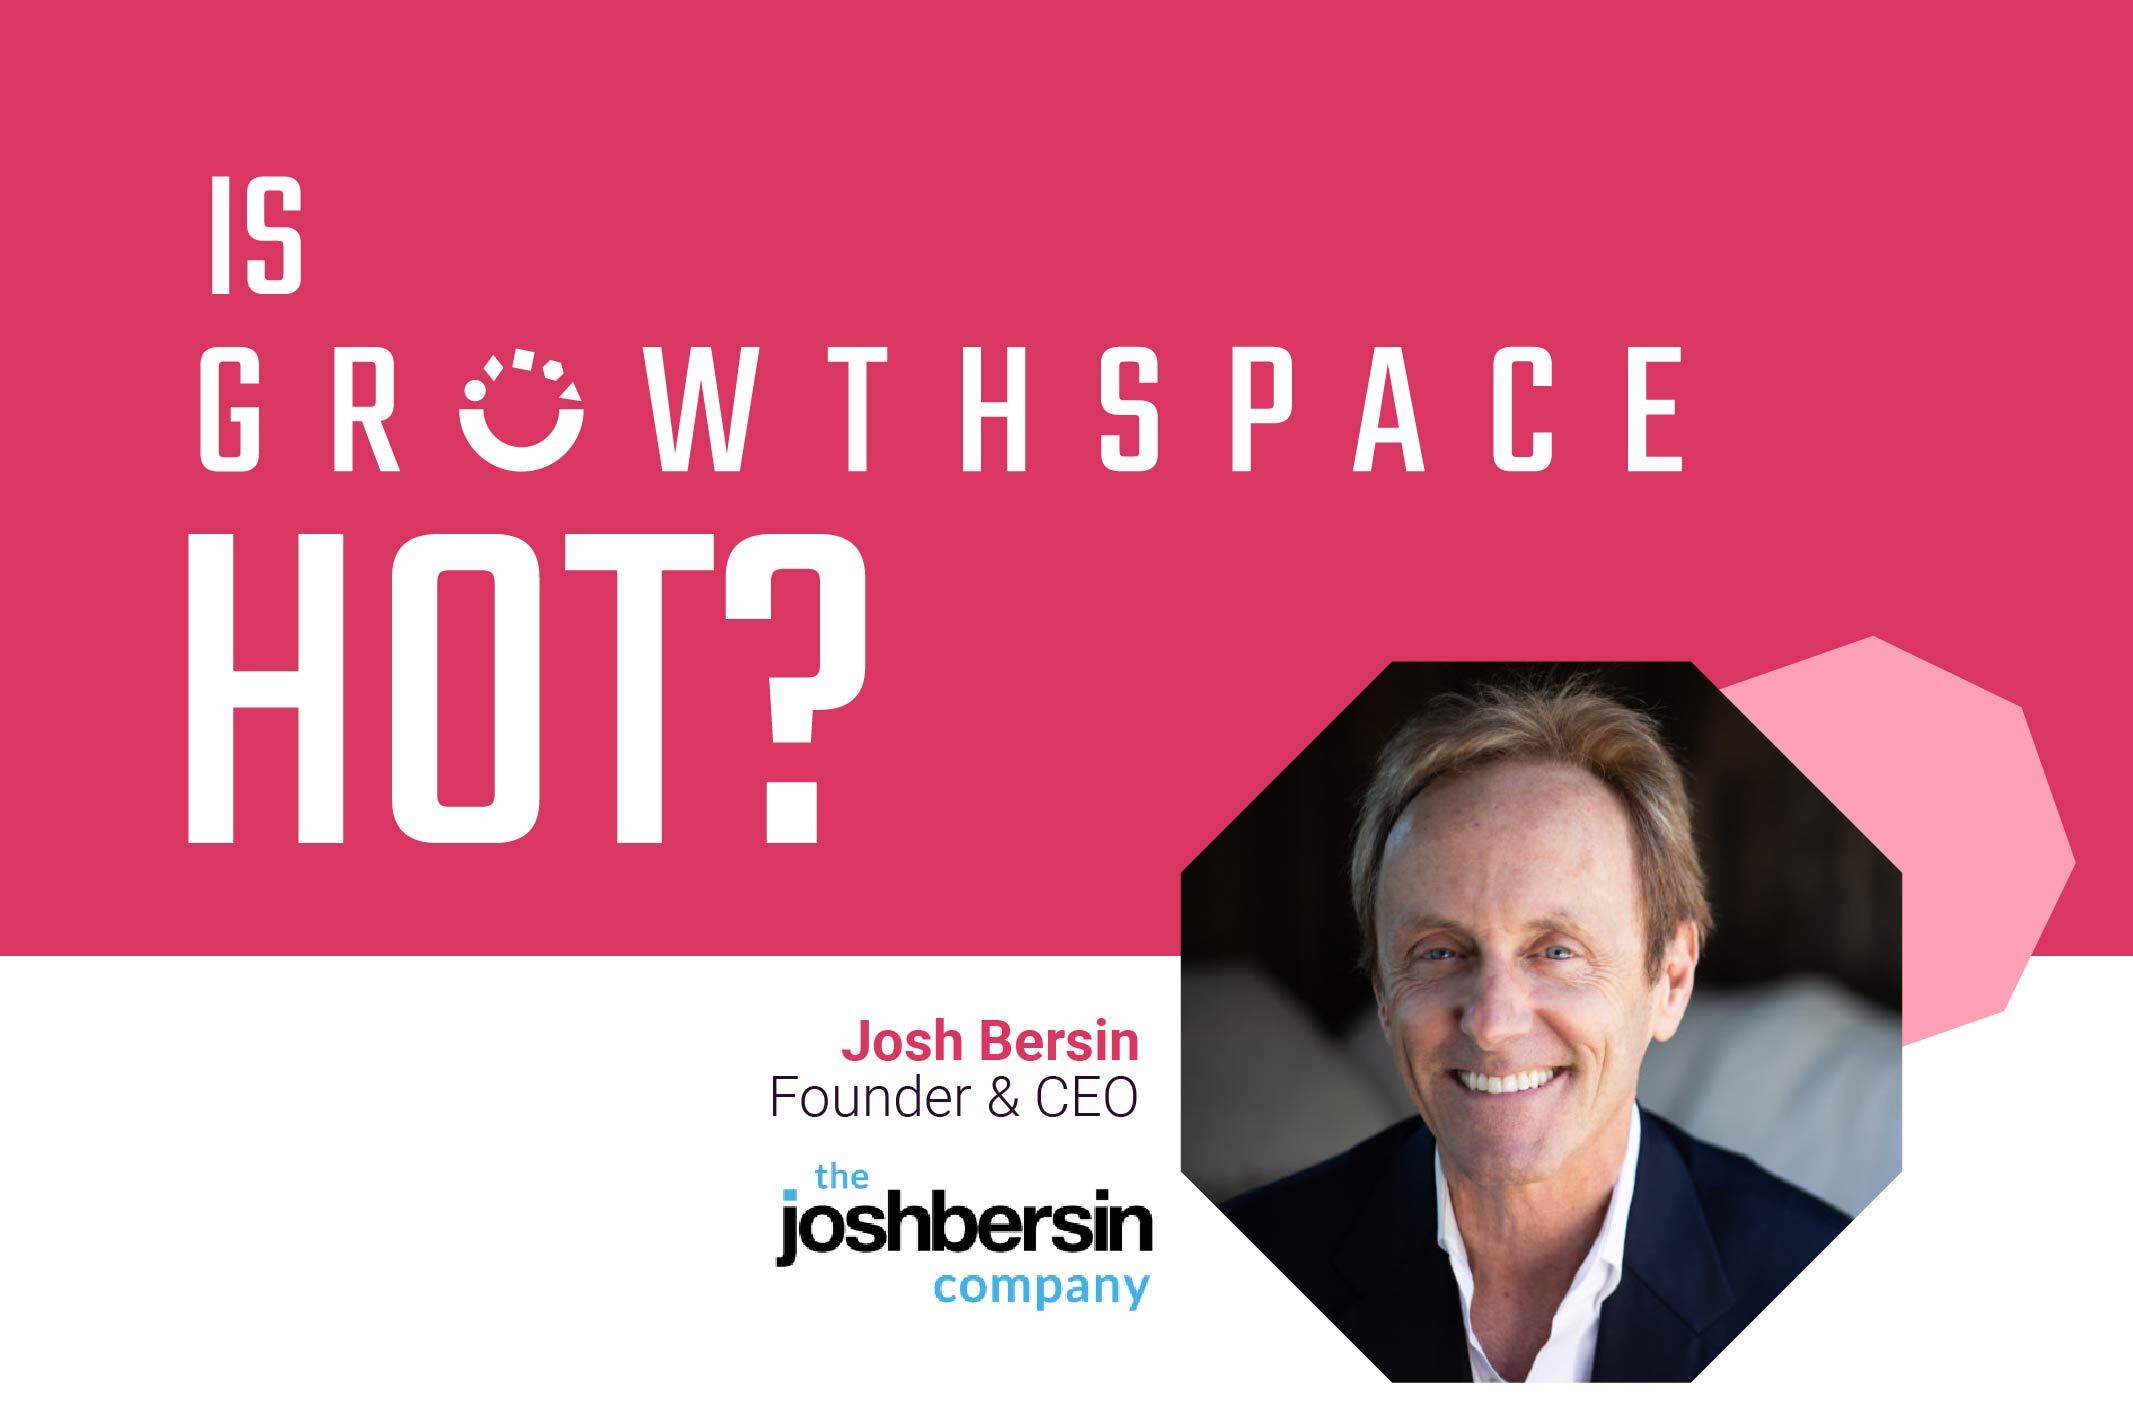 Is GrowthSpace hot